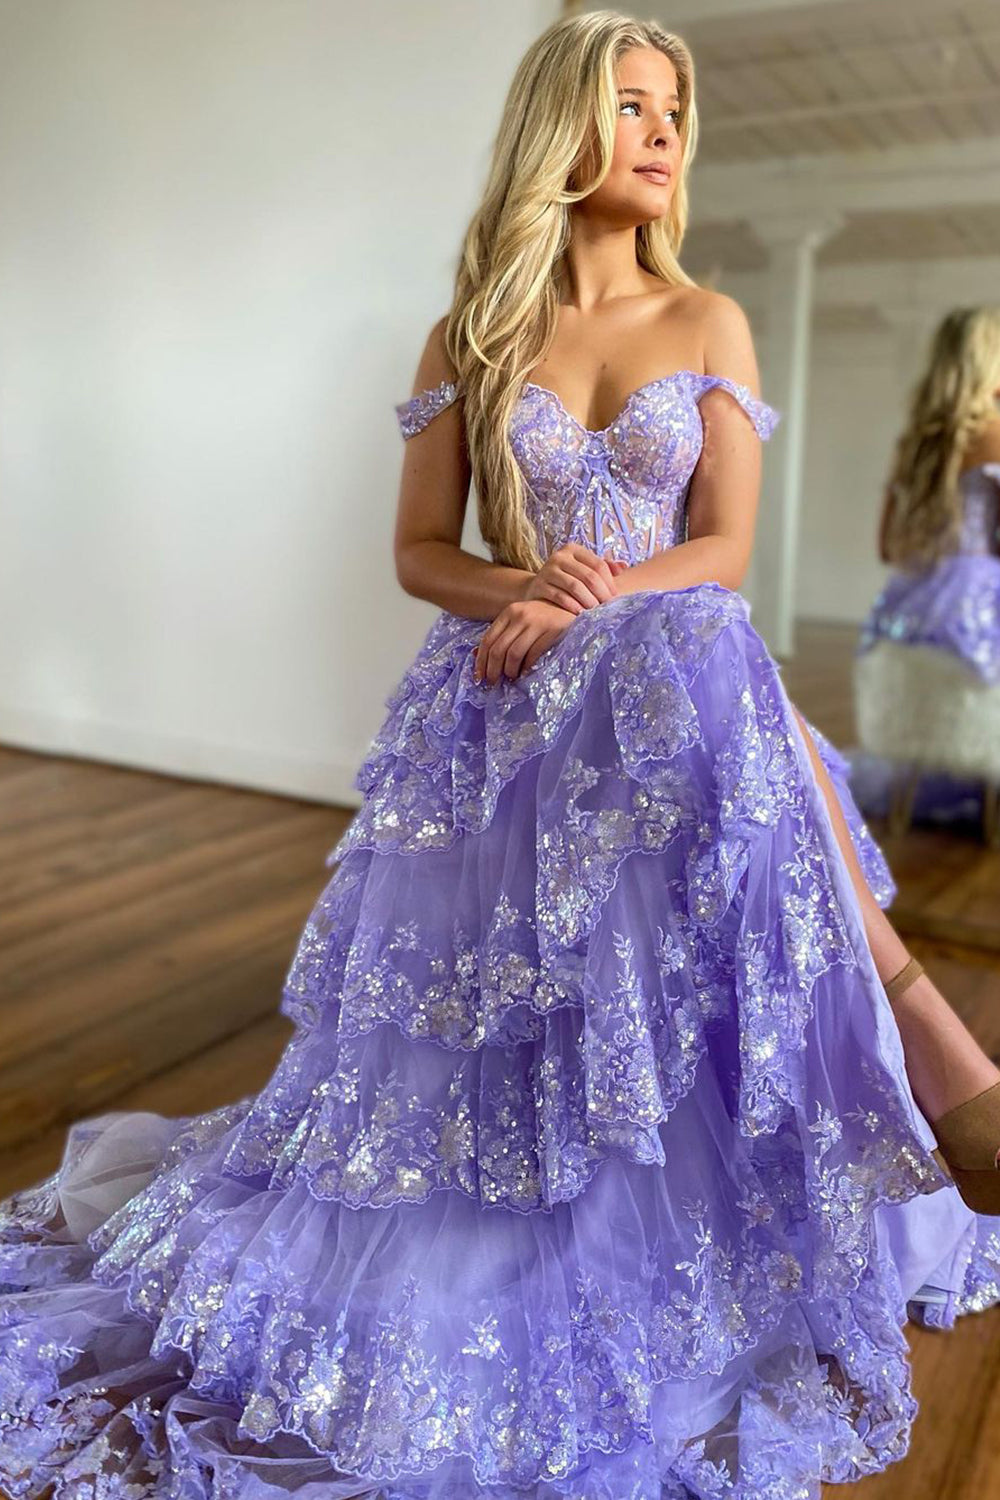 Princess A Line Off the Shoulder Corset Prom Dress with Lace Ruffles